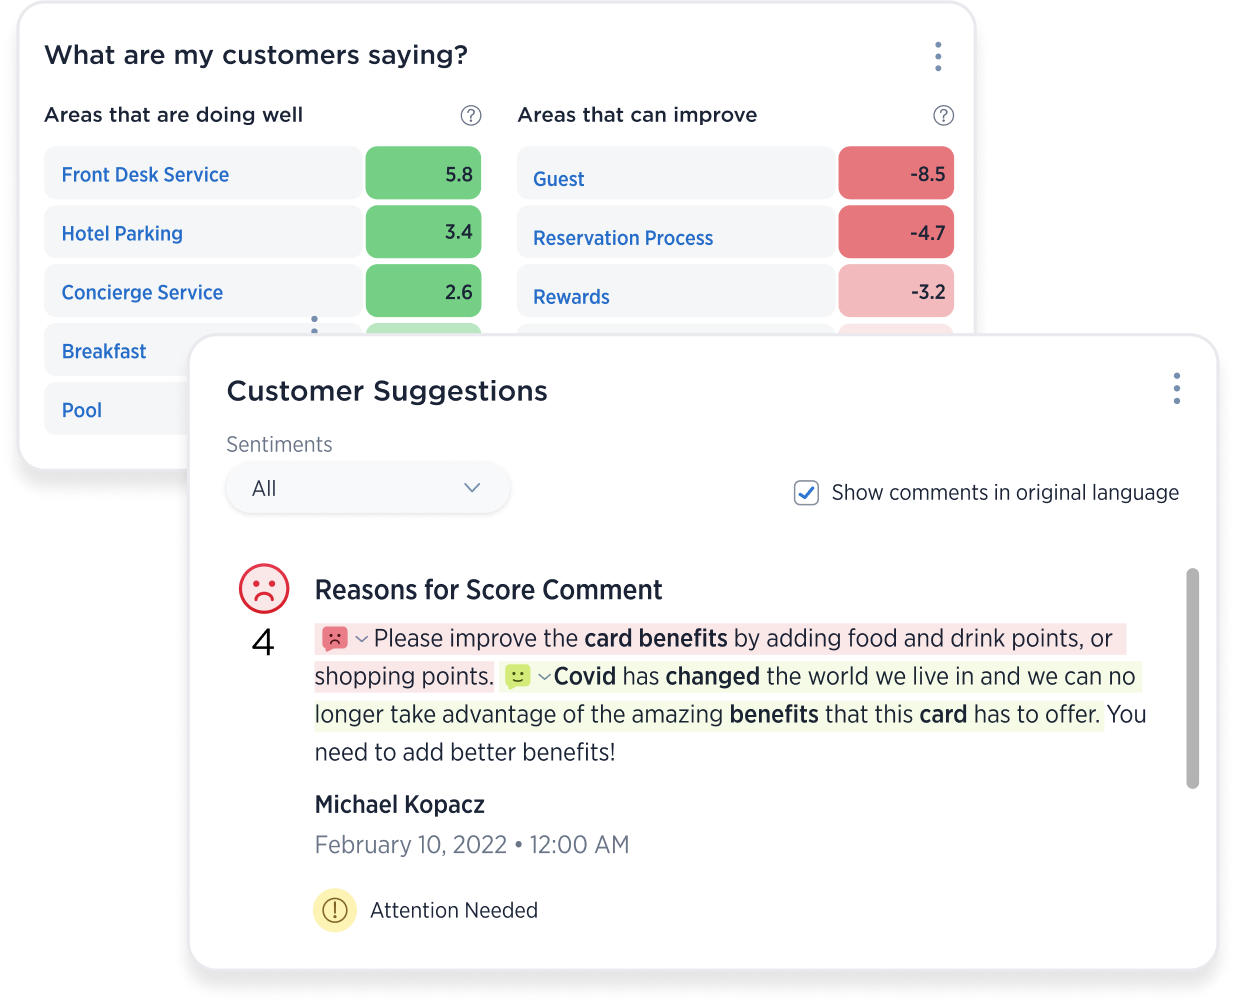 Screenshot of Medallia's sentiment analysis tool with two overlays showing "what are my customers saying" and "customer suggestions."